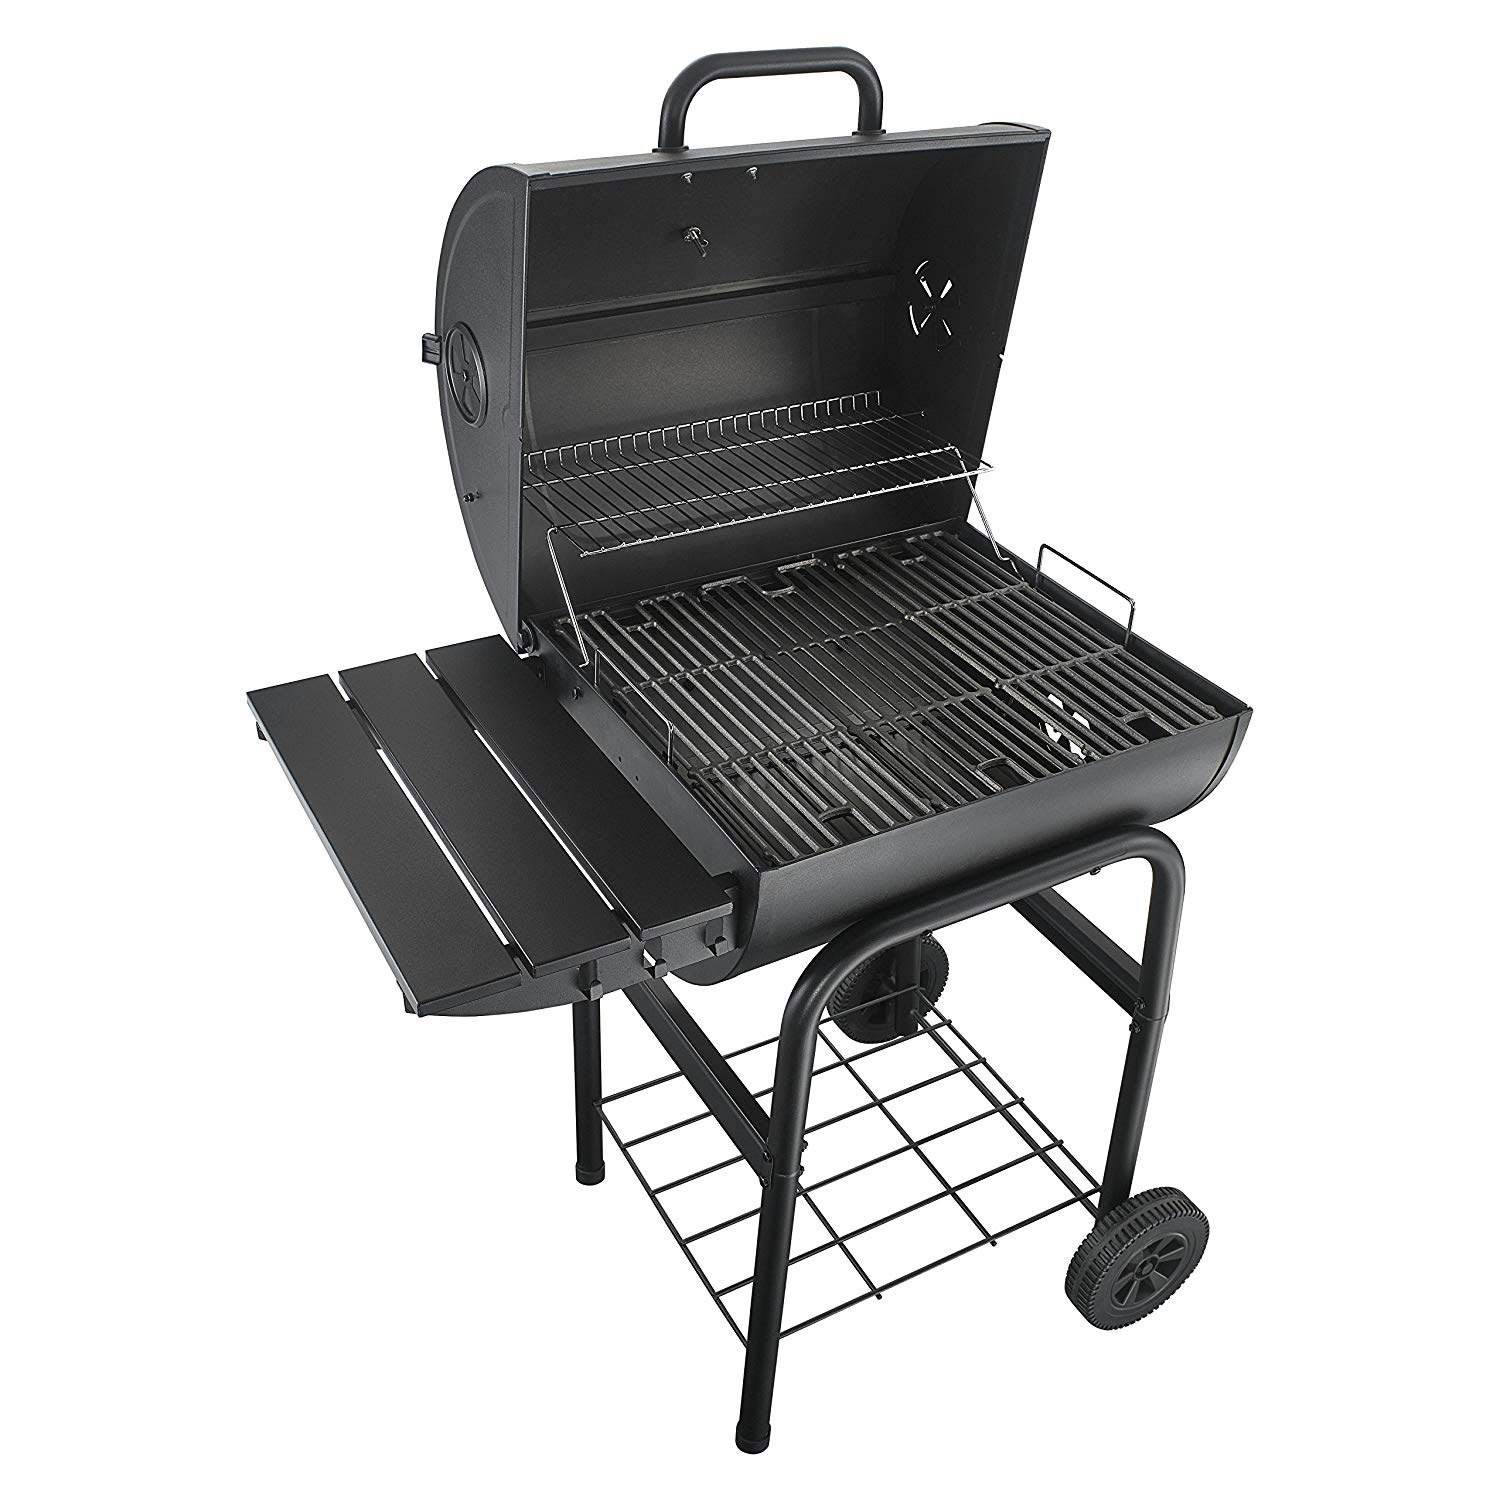 Char-Broil American Gourmet 17302055 625 Square Inch Cast Iron Charcoal Grill - image 4 of 5